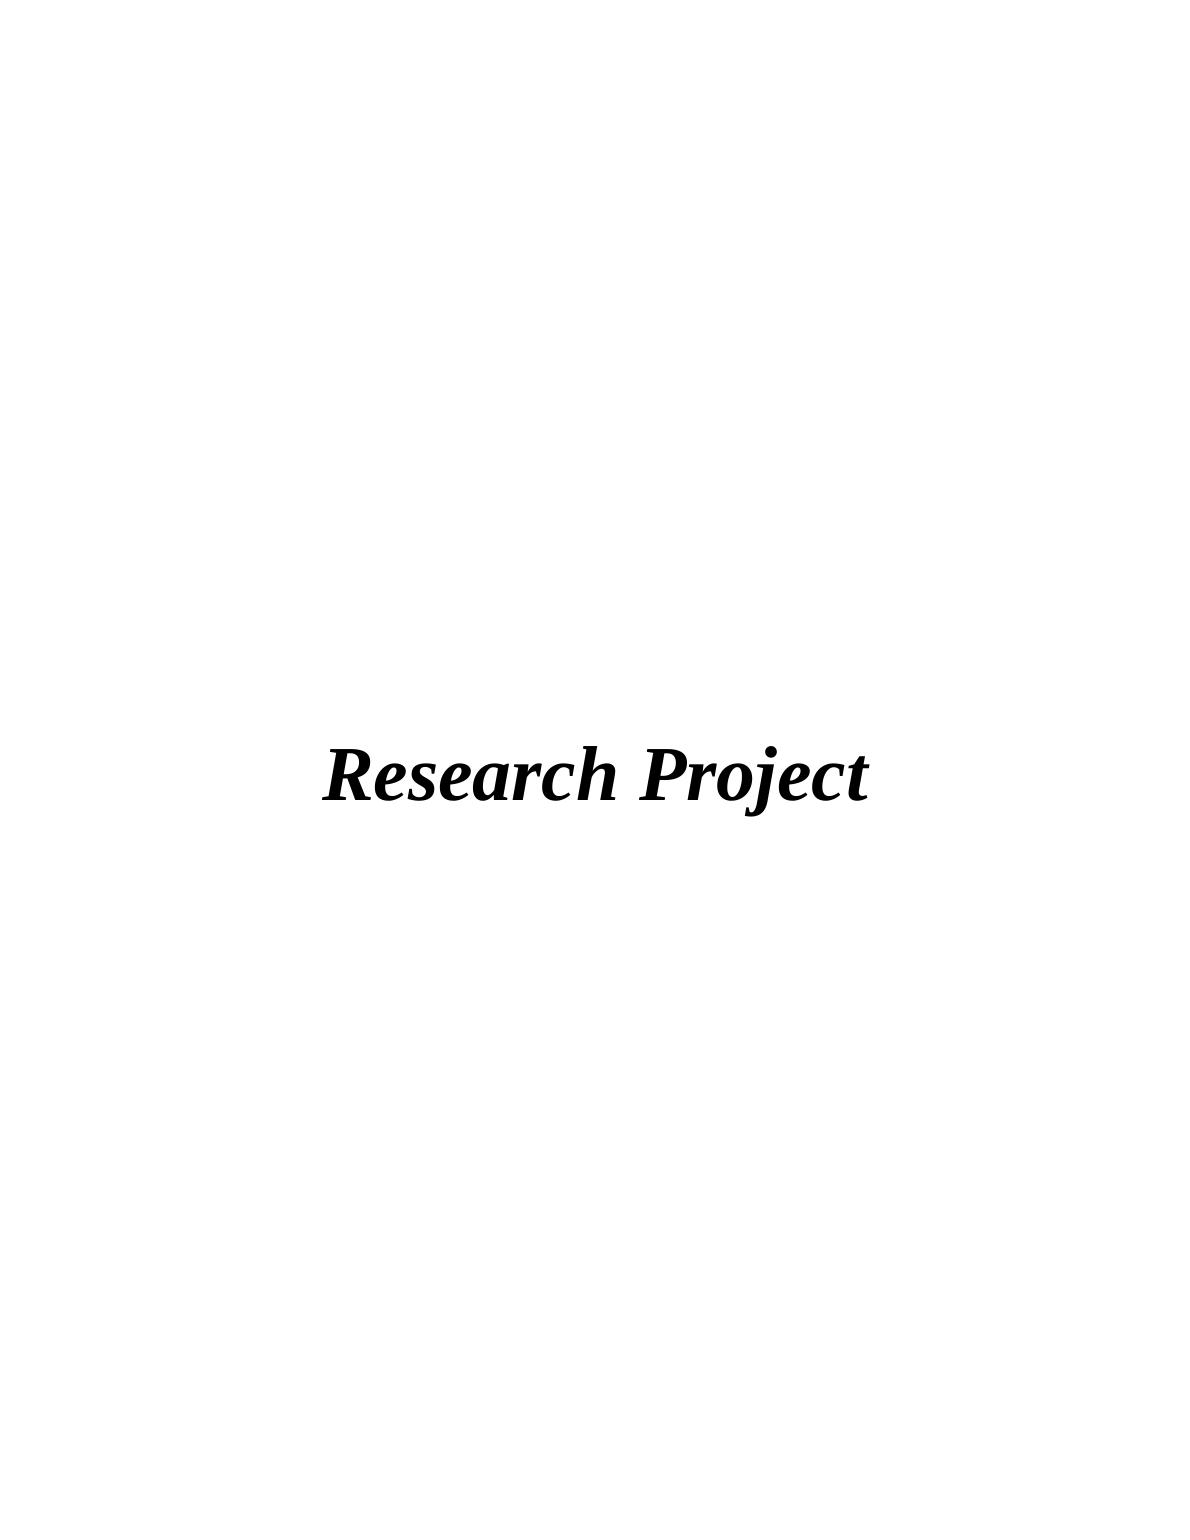 A Review of the LITERATURE REVIEW 6 2.1 Introduction and Research Project TITLE 3_1